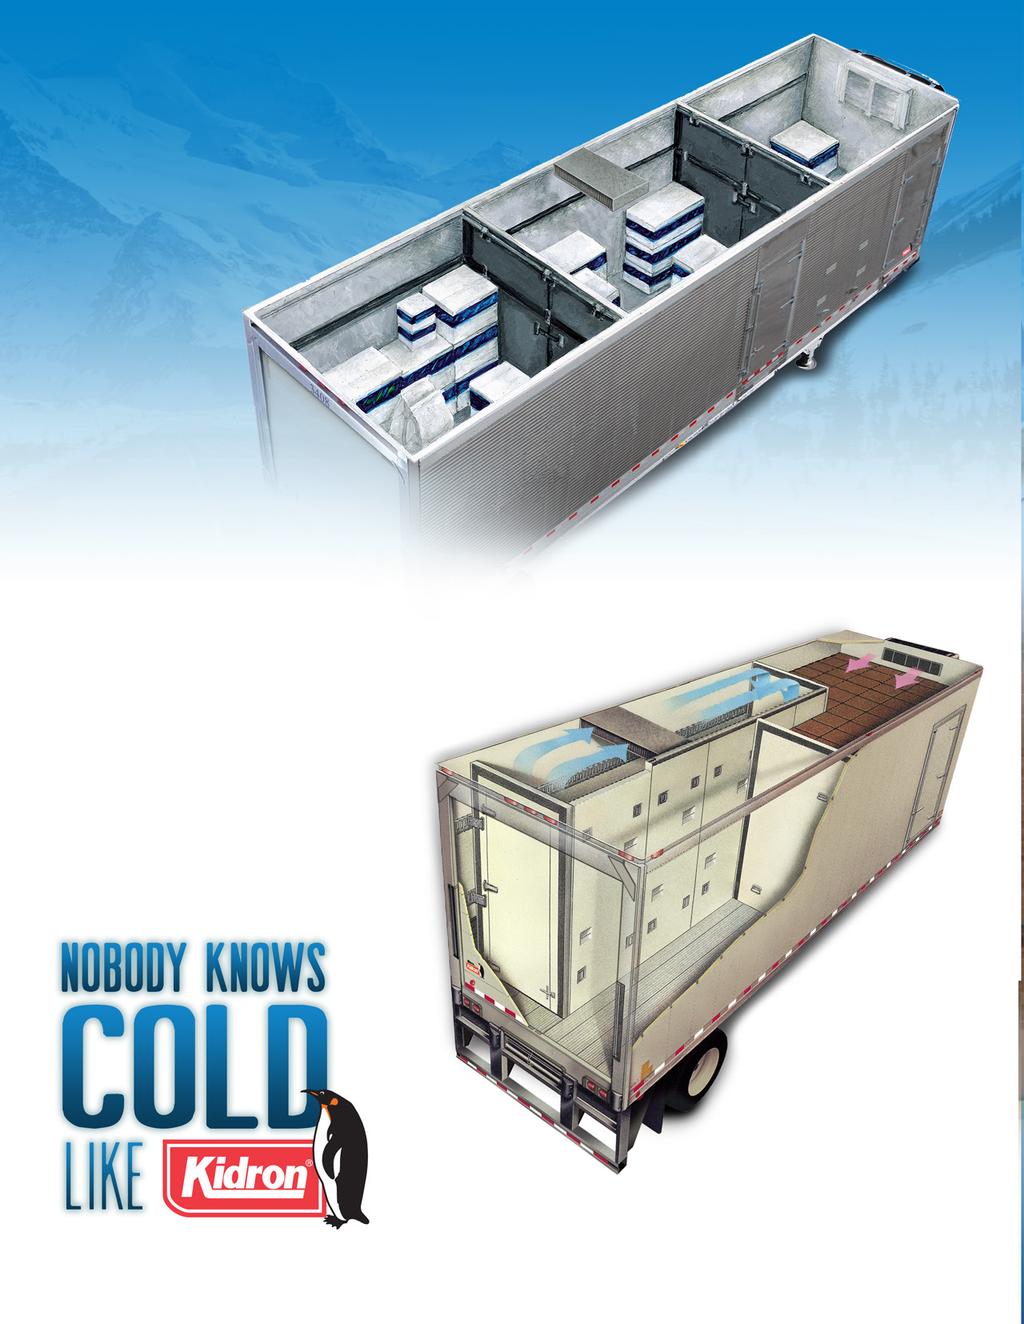 0 F 35 F DRY Adjustable compartments for multi-temp efficiency Kidron pioneered multi-temp distribution by creating cargo management systems with partitions and remote refrigeration.